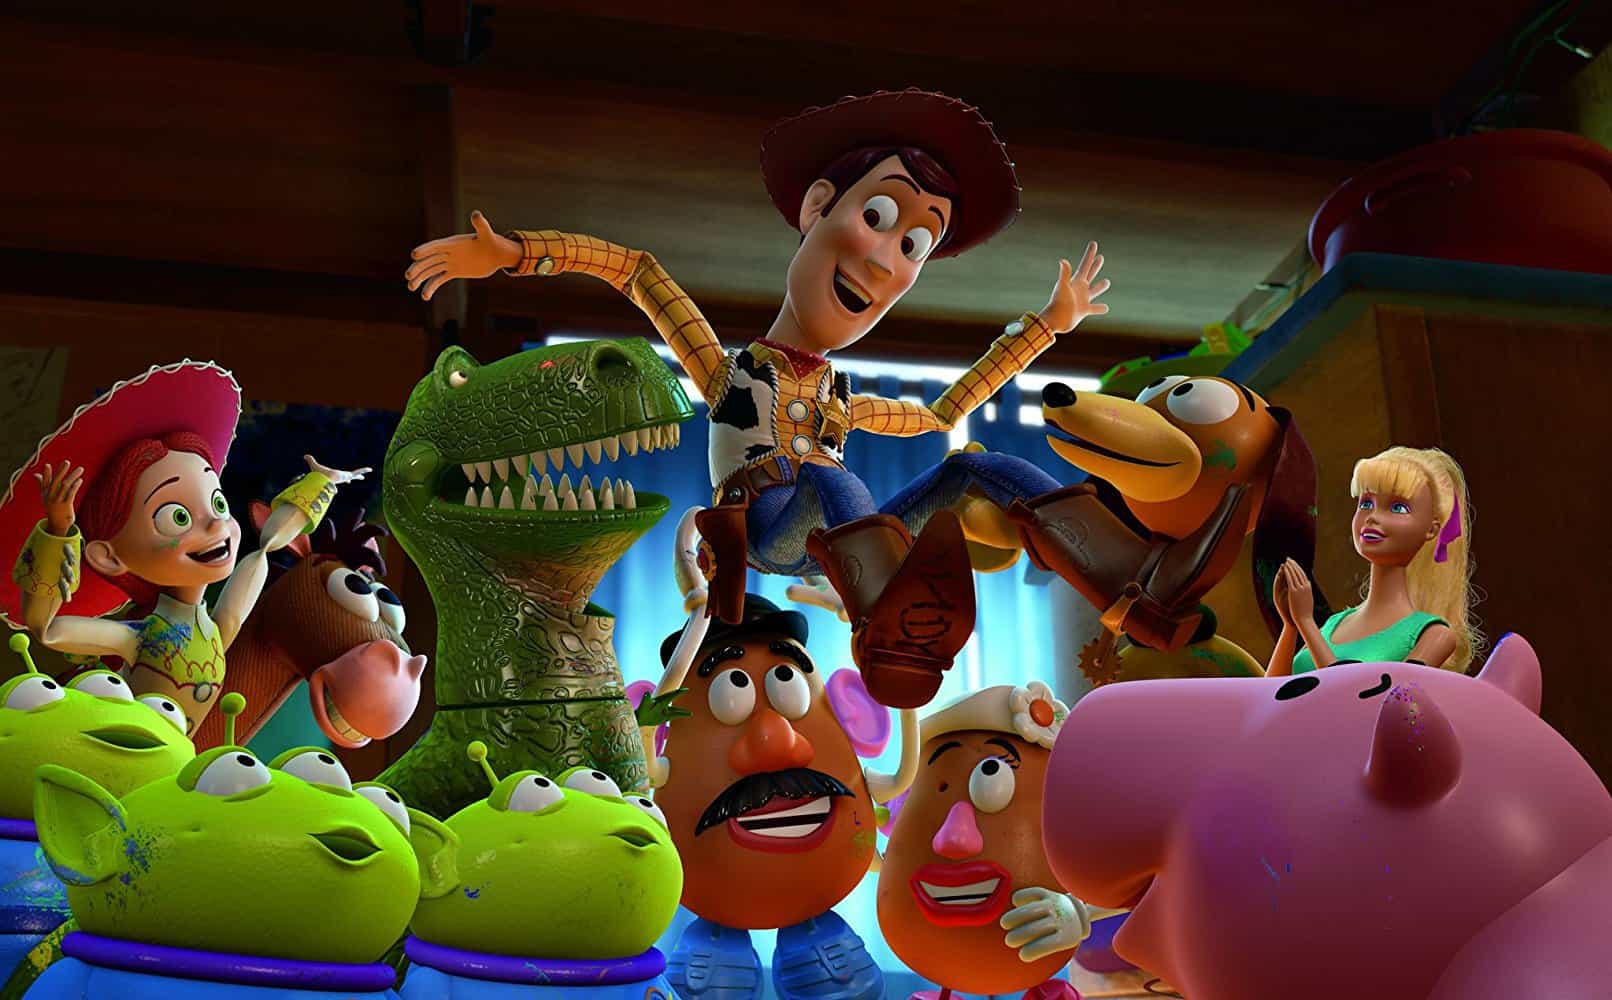 dothetoys in toy story 3 gothrough incinerator